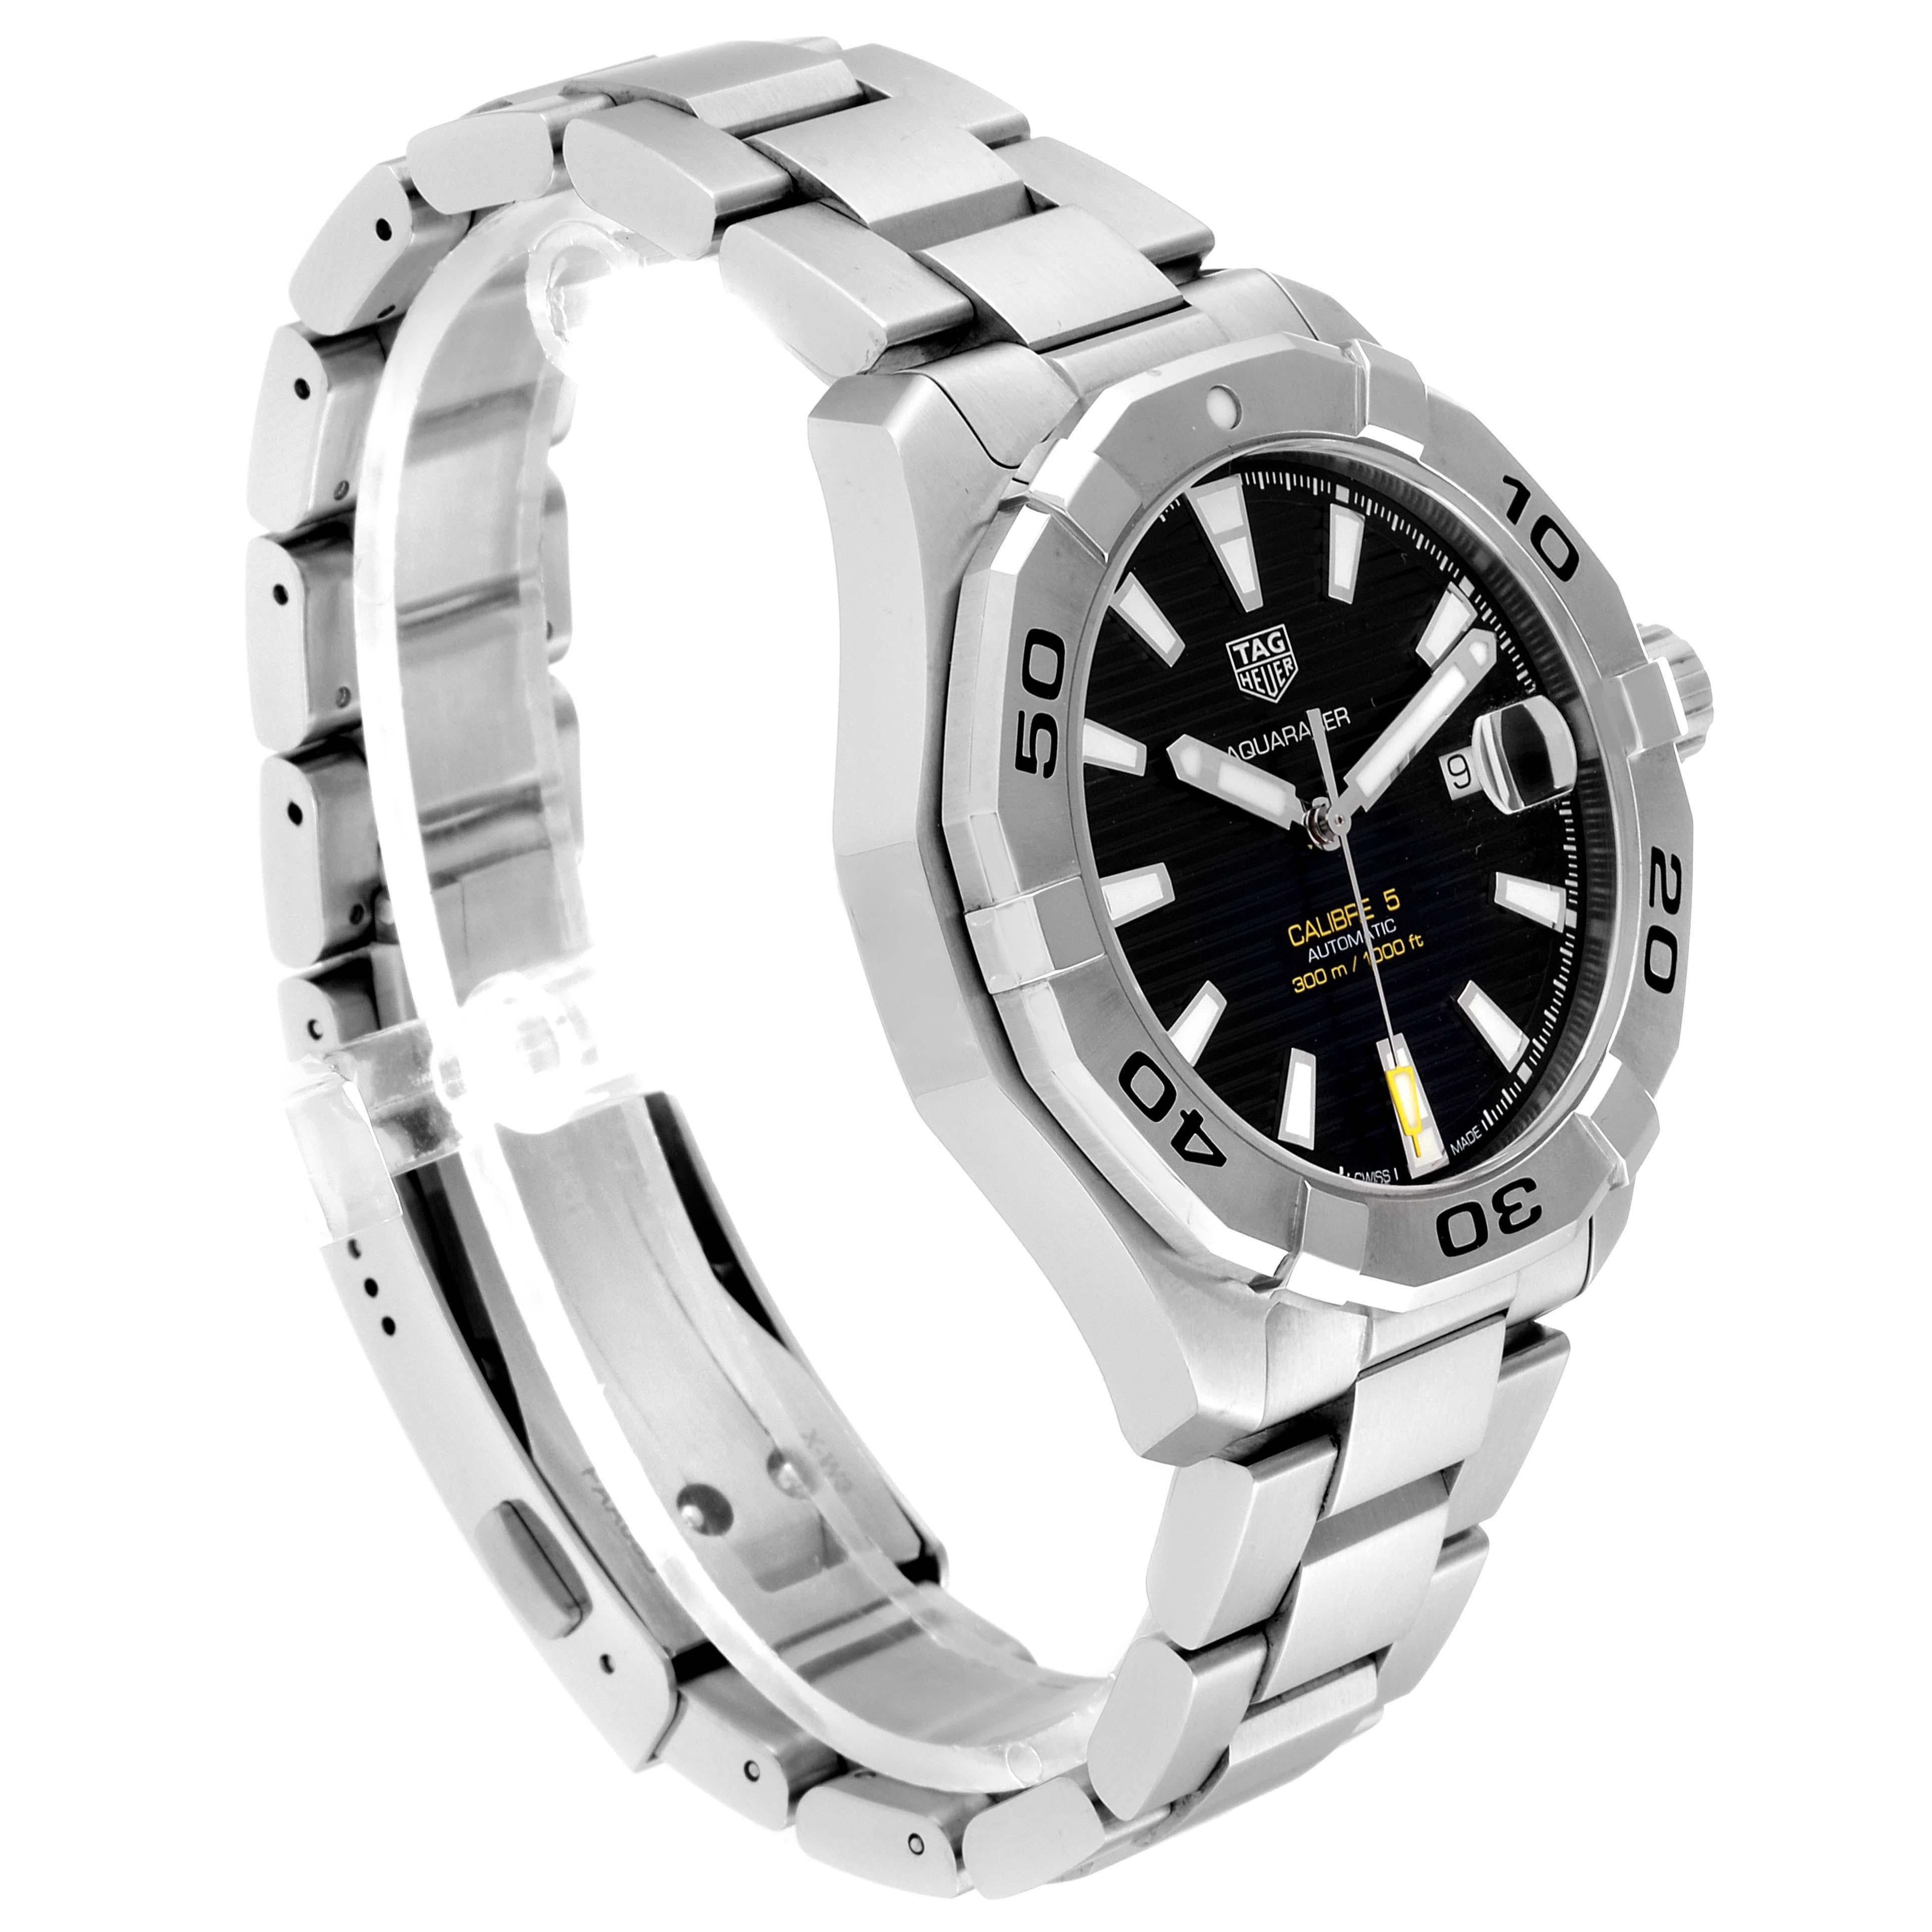 TAG Heuer Aquaracer Black Dial Steel Men's Watch WAY2010 Box Card In Excellent Condition For Sale In Atlanta, GA